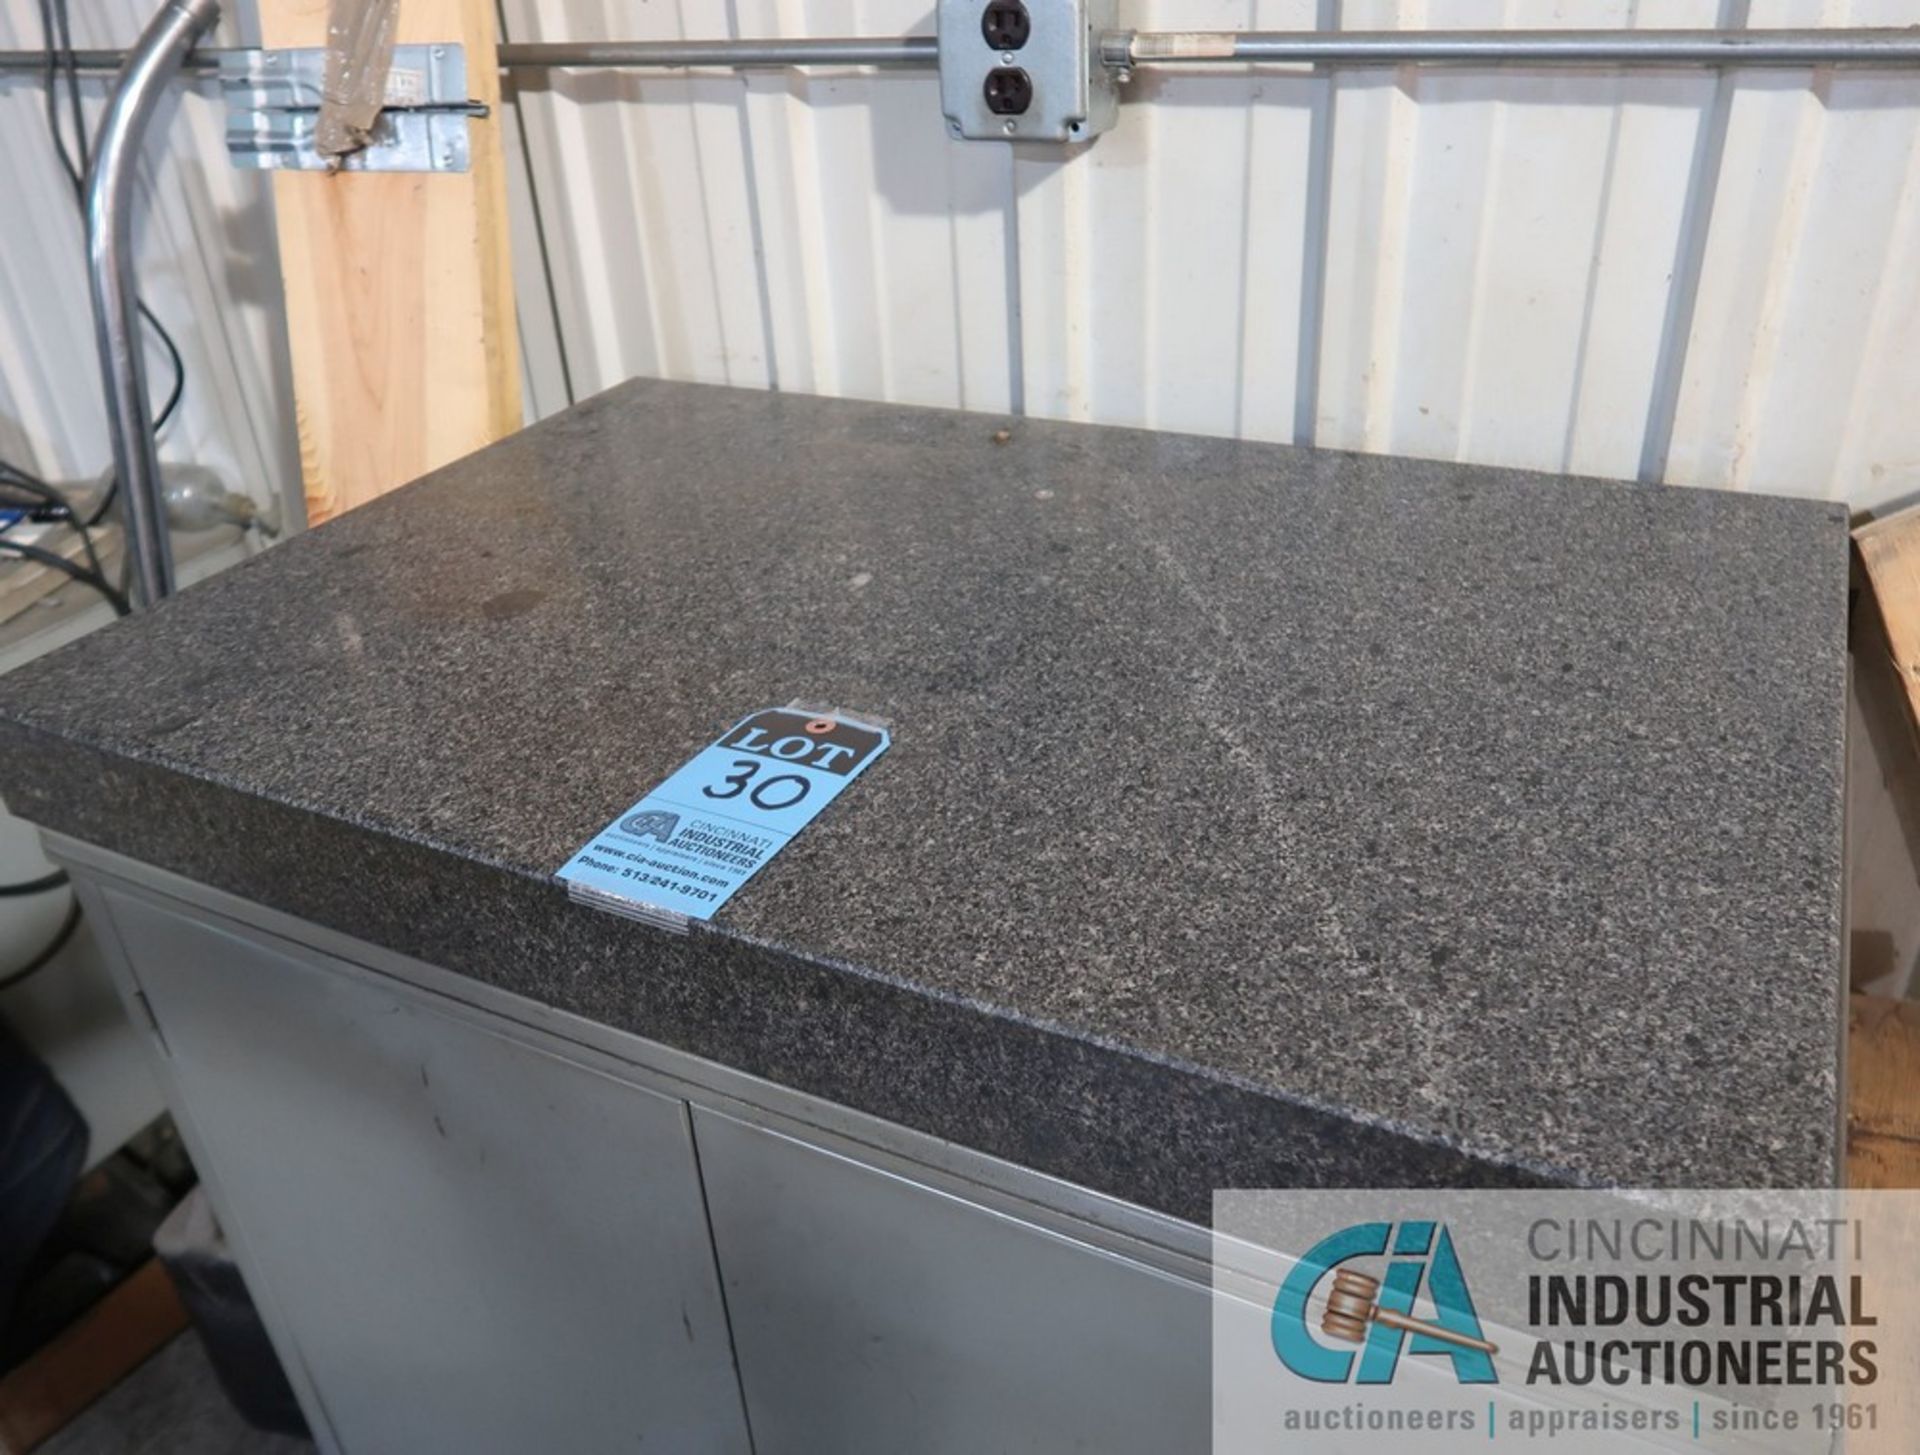 24" X 36" X 3" THICK DOALL BLACK GRANITE SURFACE PLATE WITH CABINET - Image 2 of 3